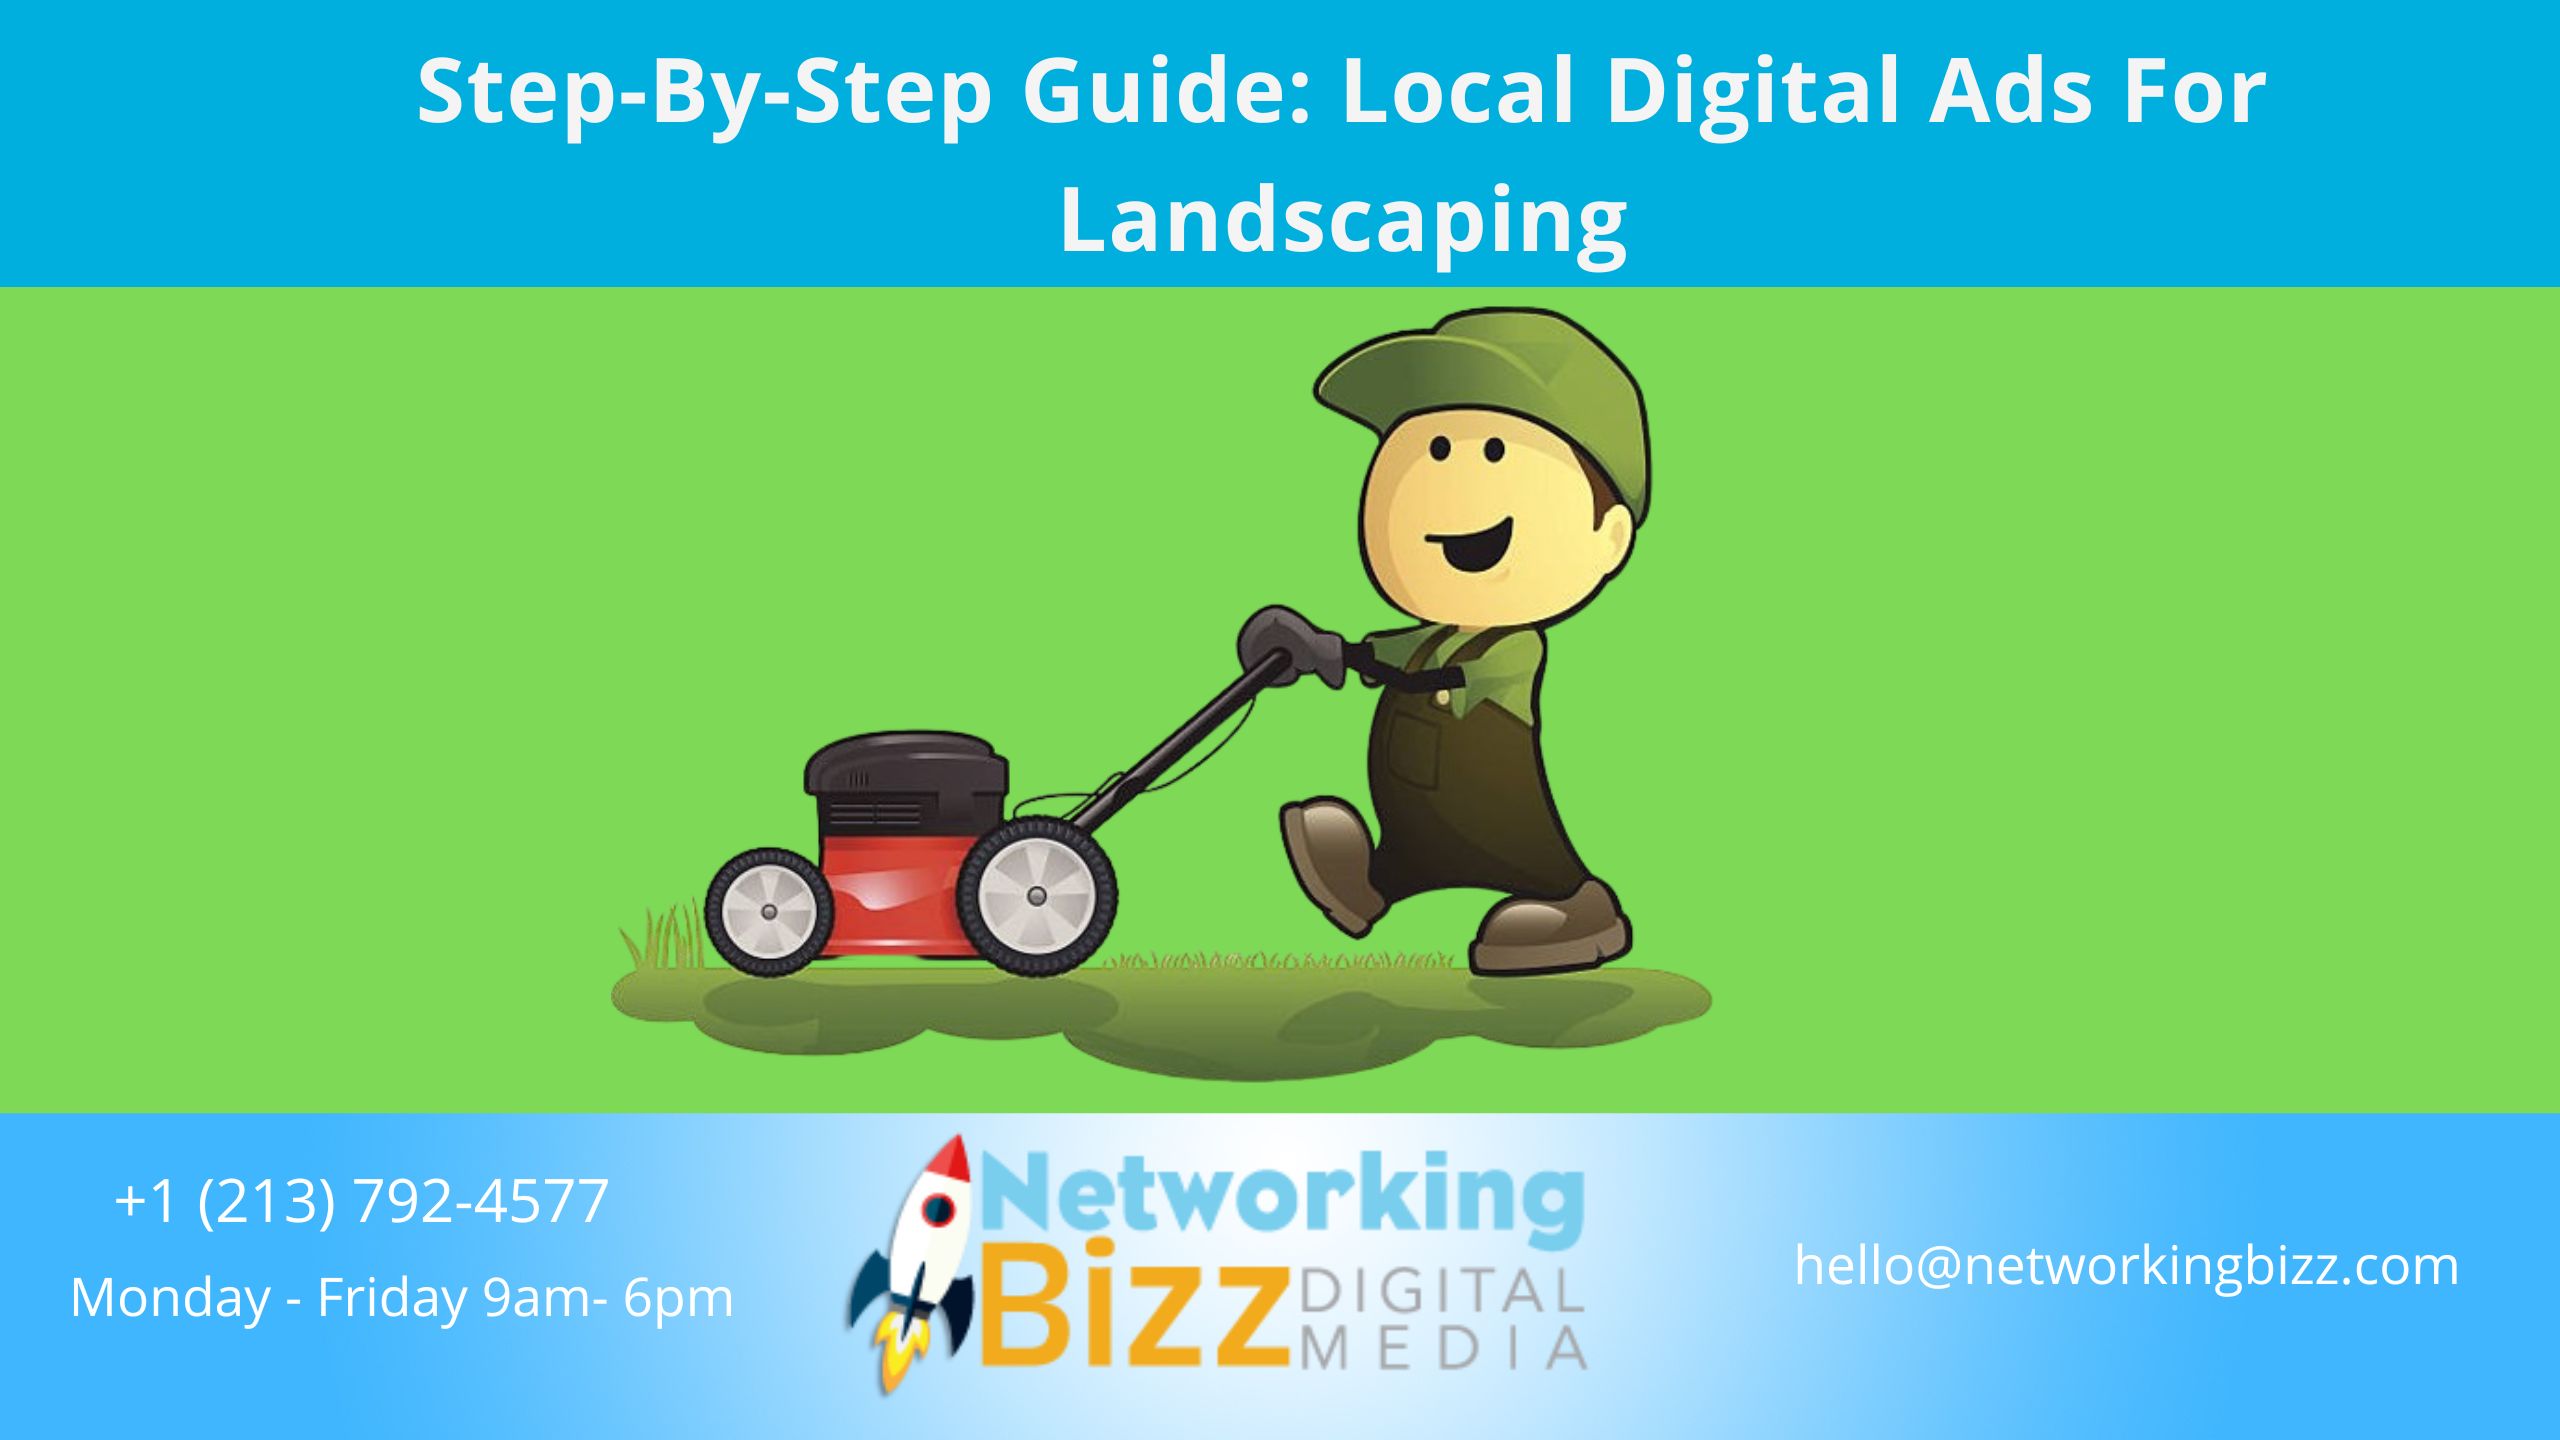 Step-By-Step Guide: Local Digital Ads For Landscaping